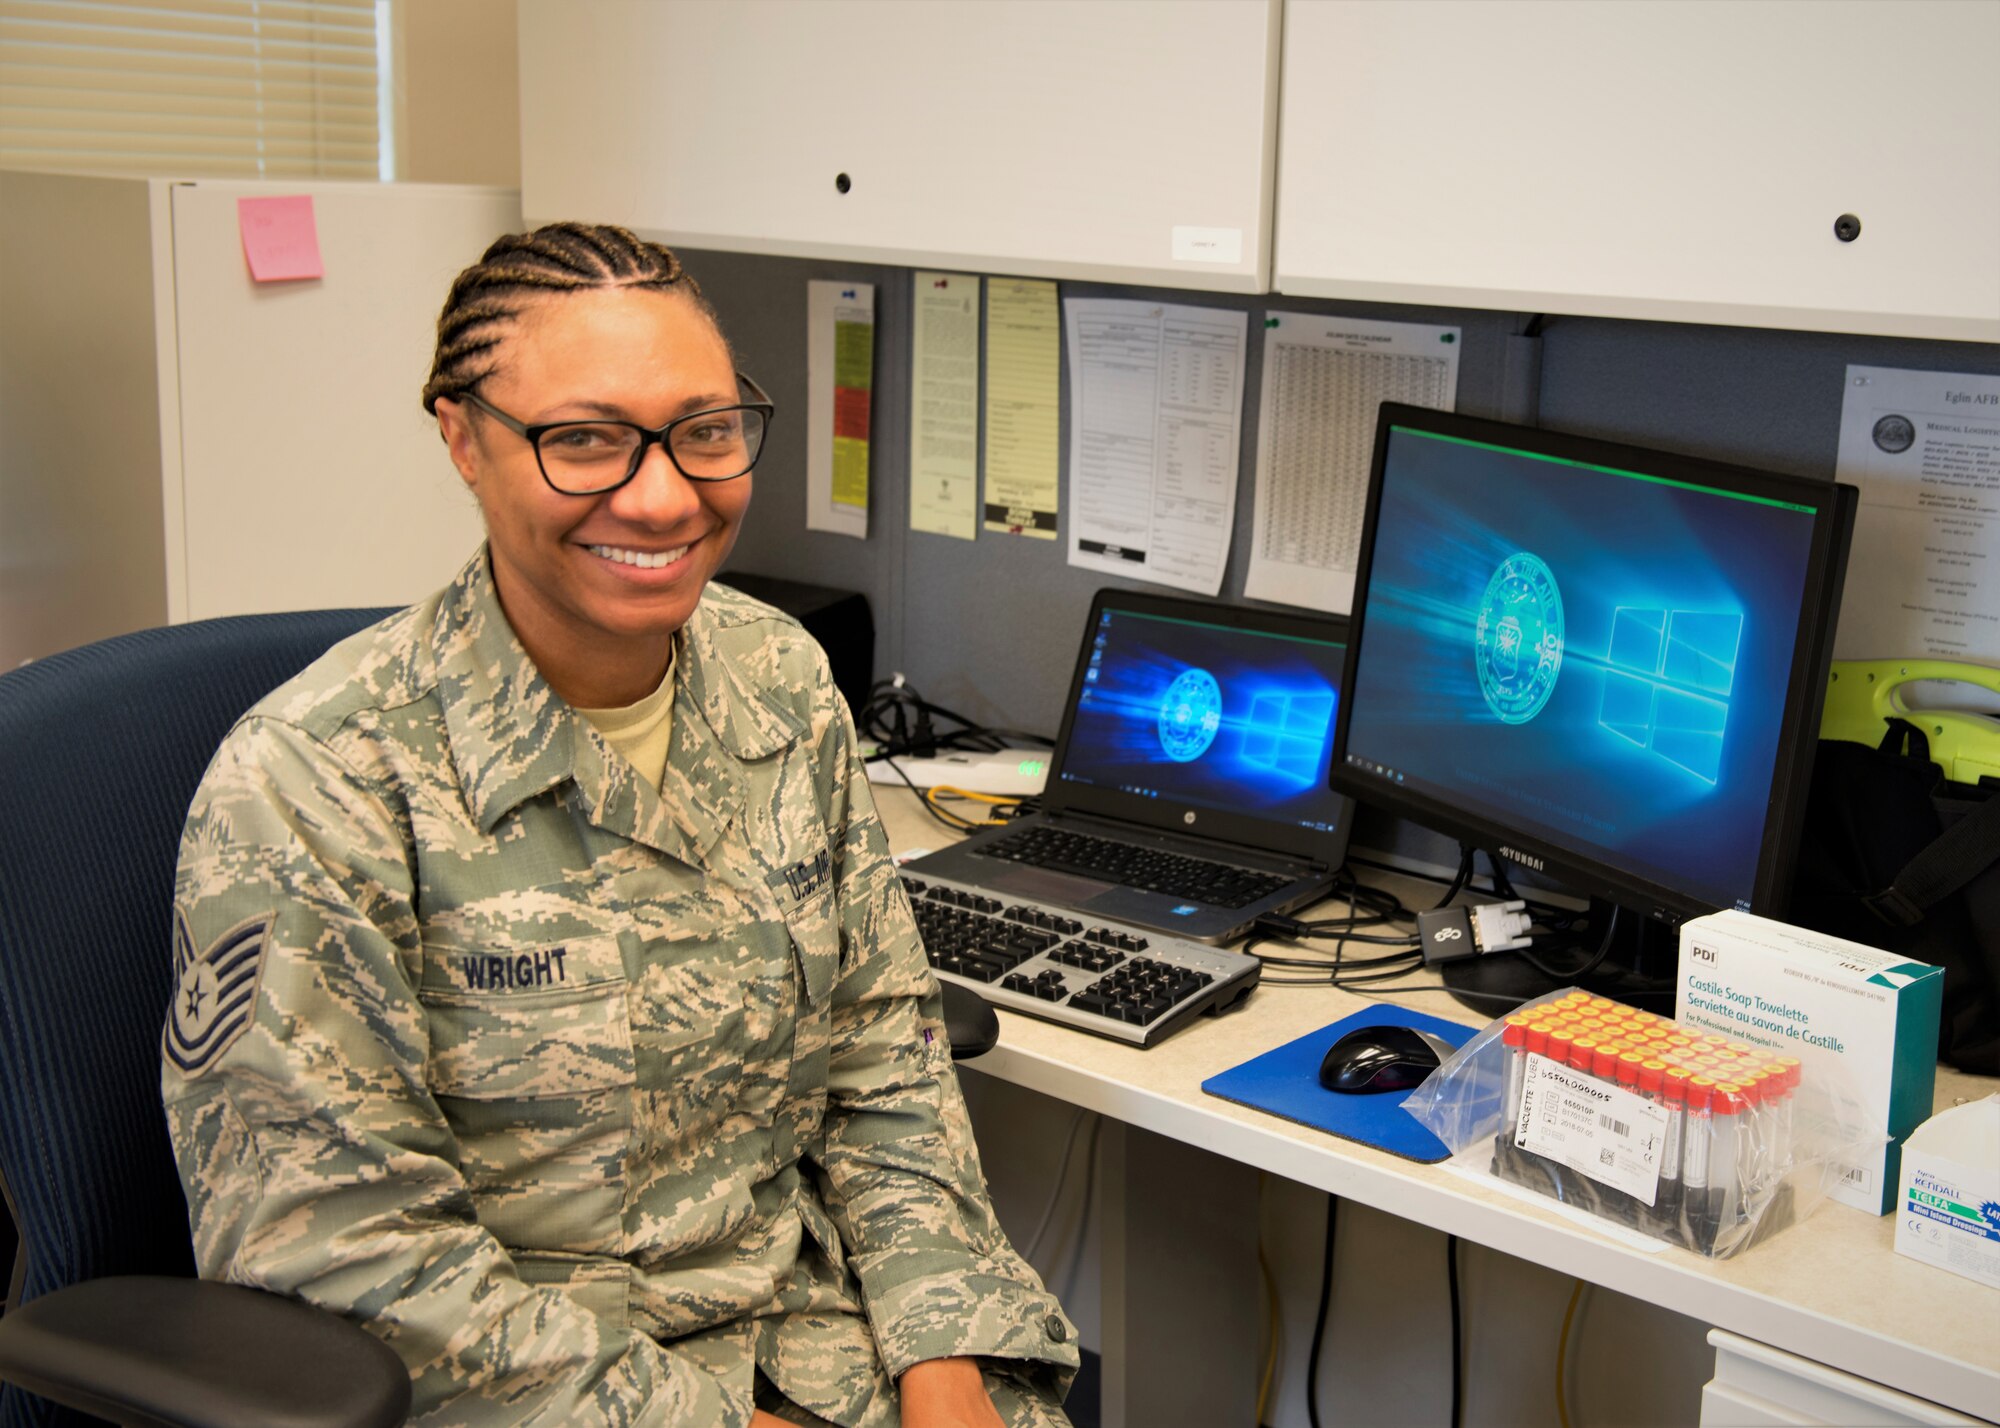 Tech. Sgt. Brittiany Wright serves as the noncommissioned officer in charge of medical logistics for the 919th Special Operations Medical Squadron at Duke Field, Fla.